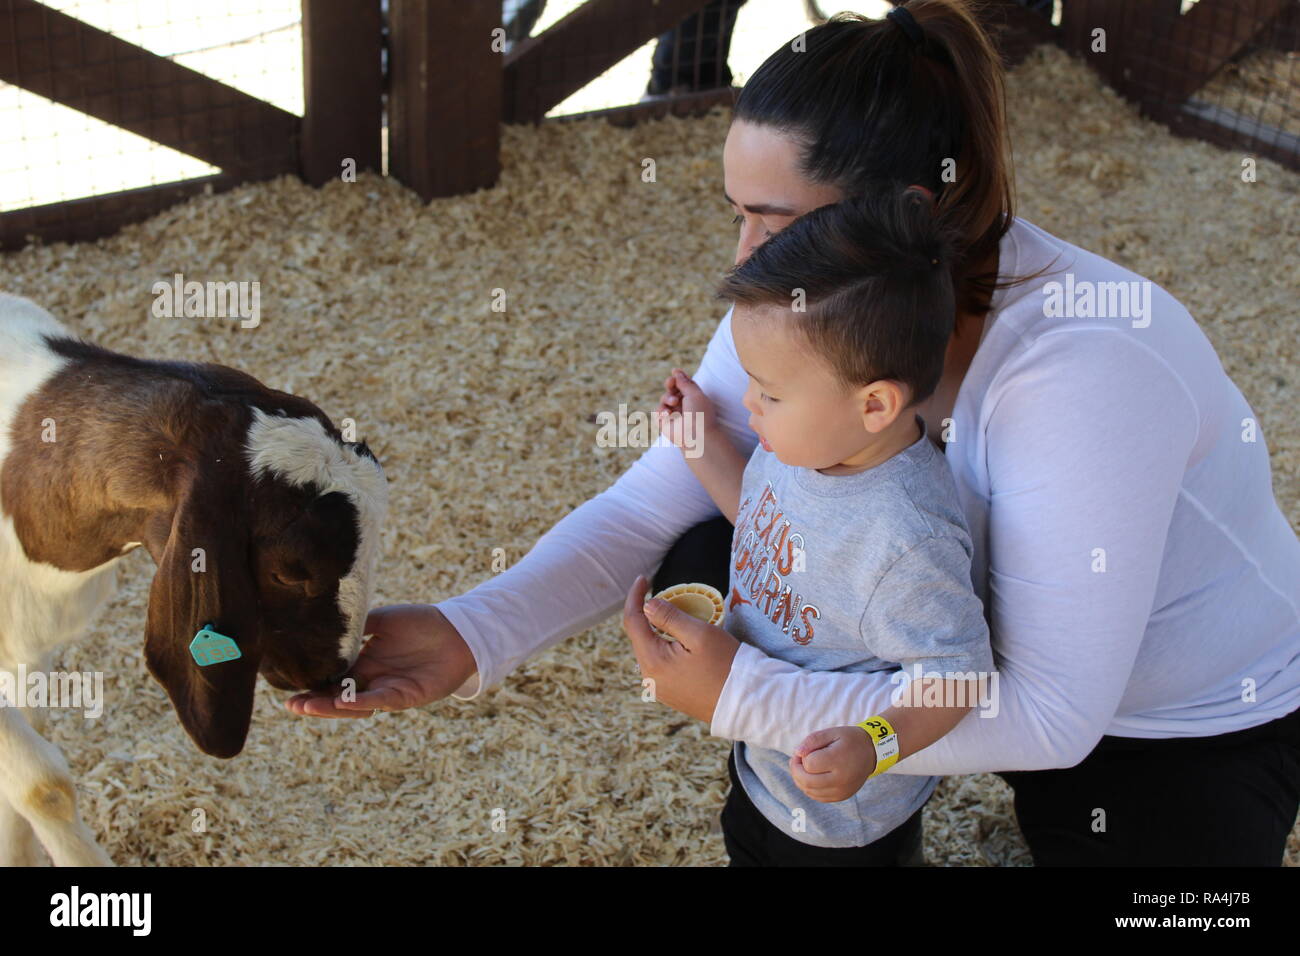 6th of October, 2018, Mom and son feeding the Goats at McCalls Pumpkin Patch, Moriarty, NM, USA: Credit: Bianca Martinez Stock Photo